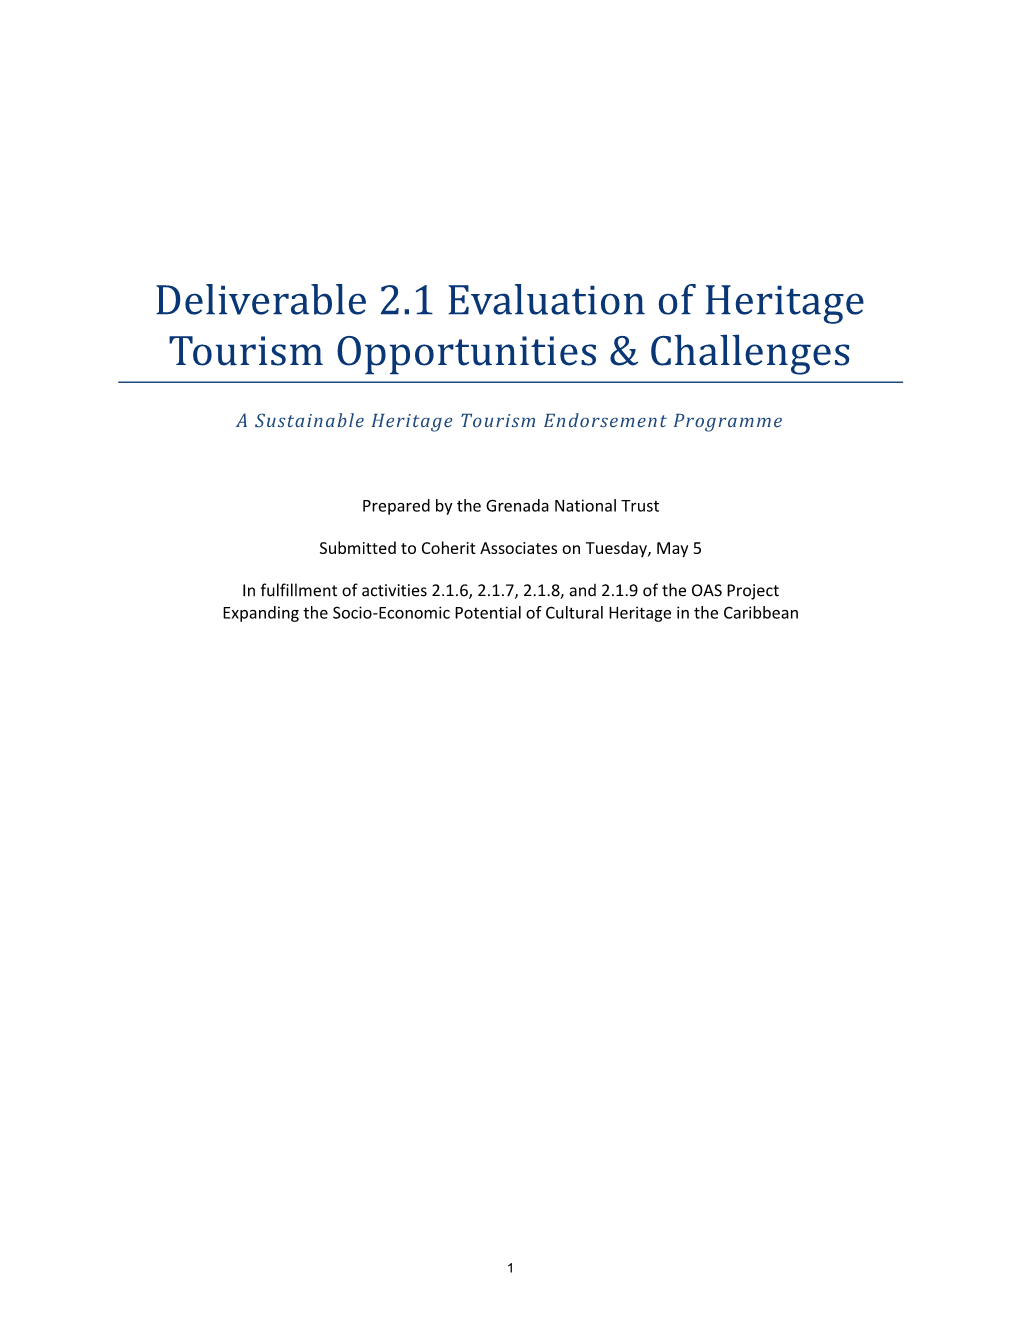 Deliverable 2.1 Evaluation of Heritage Tourism Opportunities & Challenges